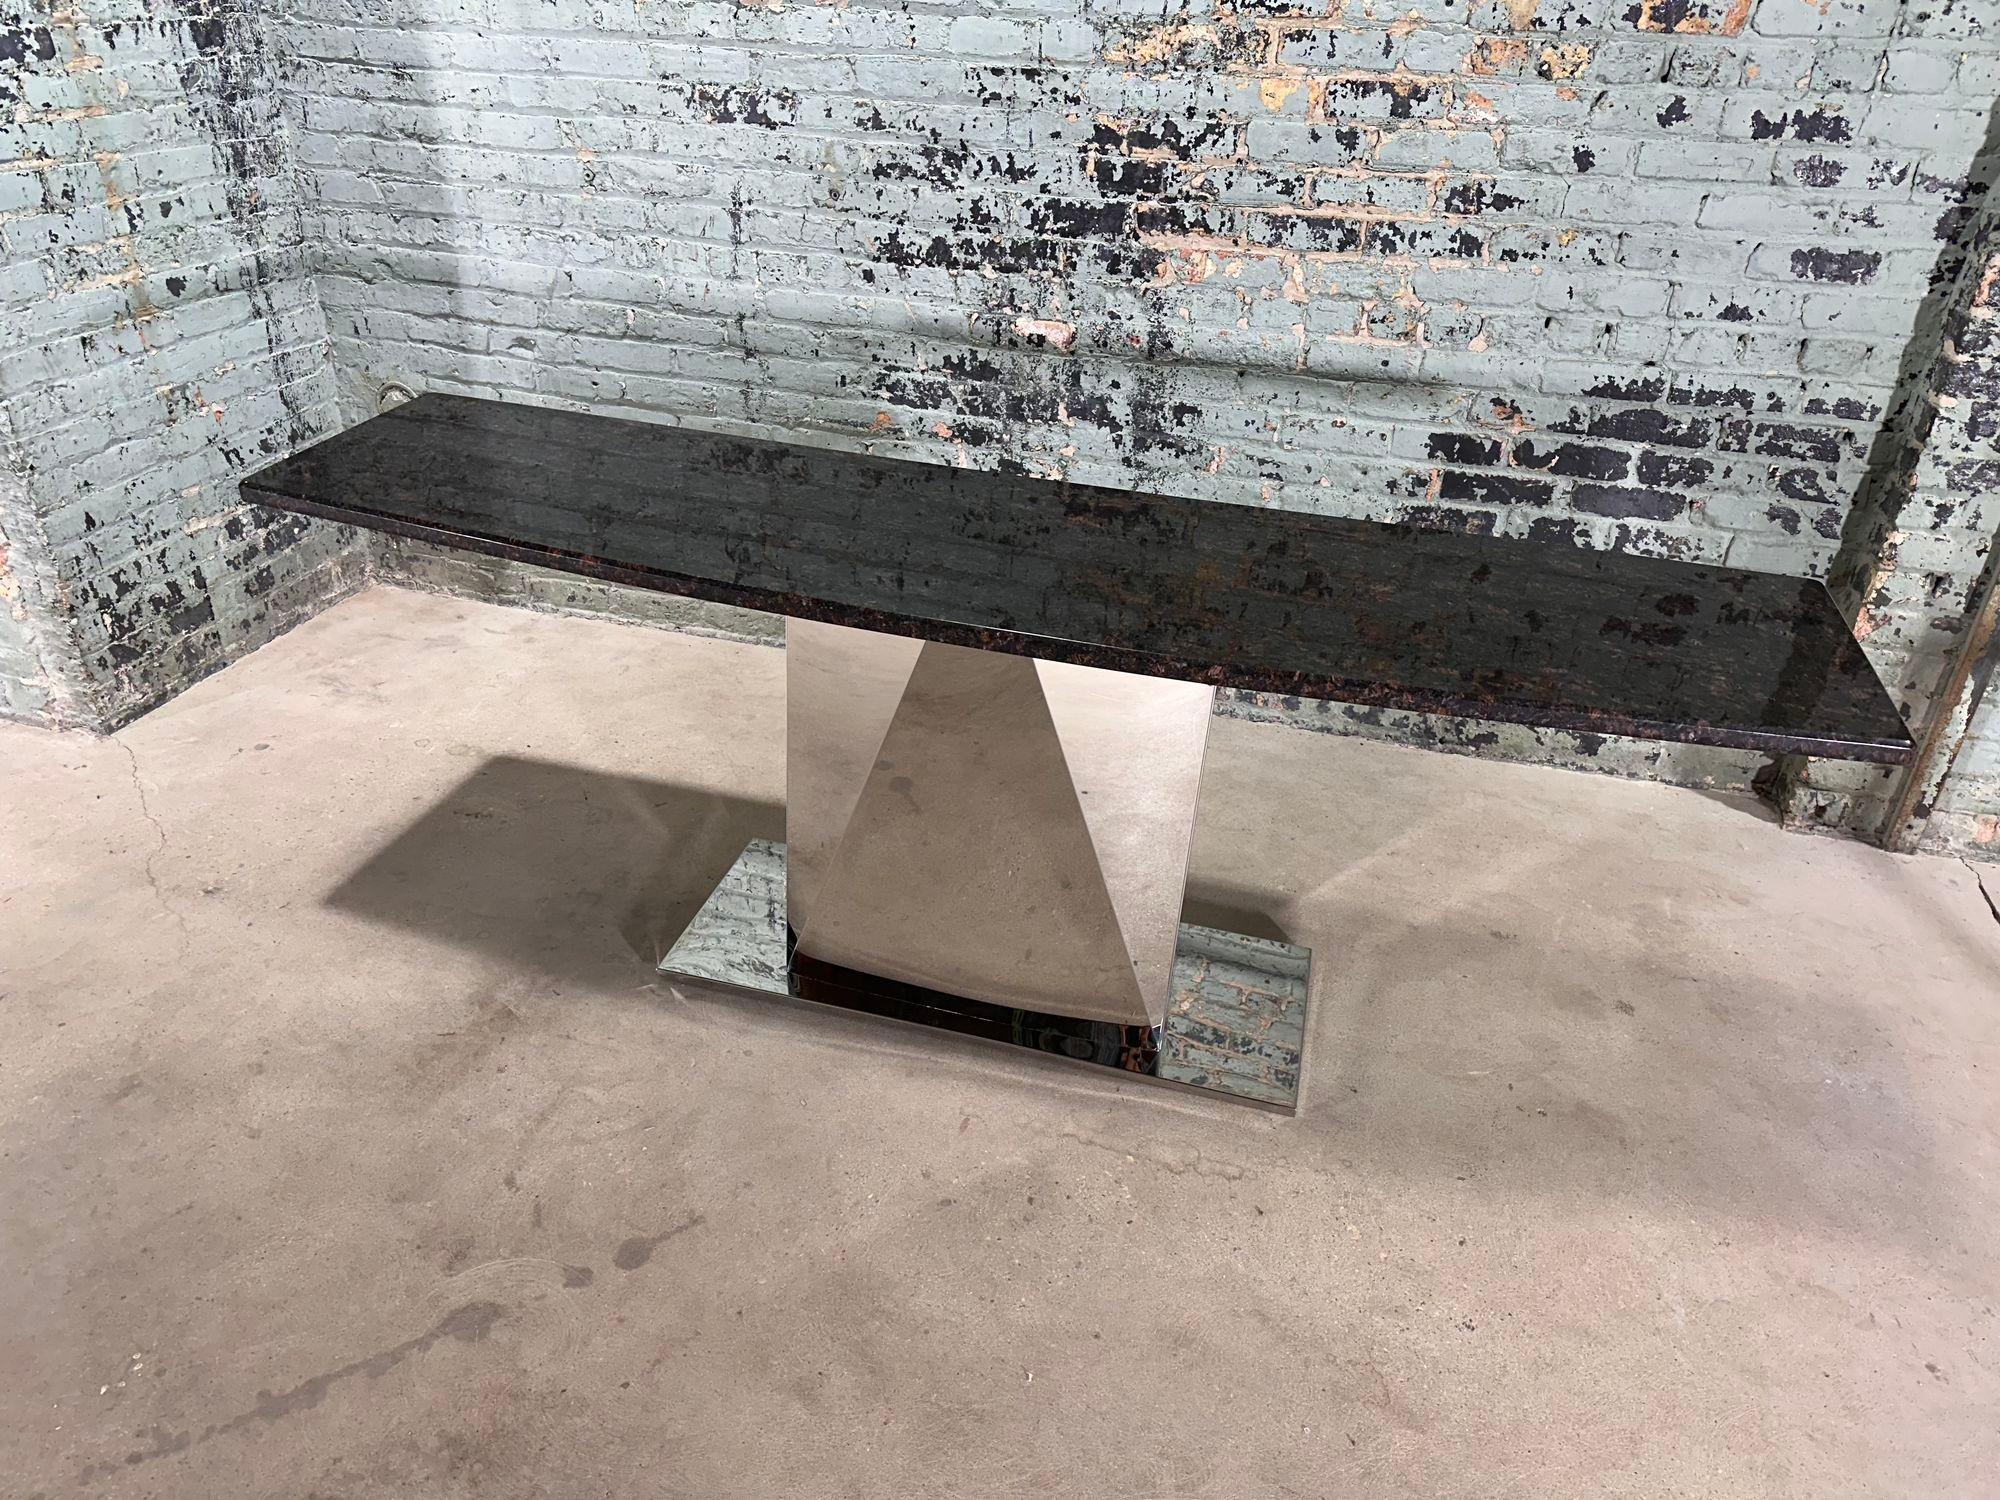 Stil der Sally Sirkin Lewis Multi Faceted Stainless Steel and Granite Console, 1970.
Maßnahmen 82 